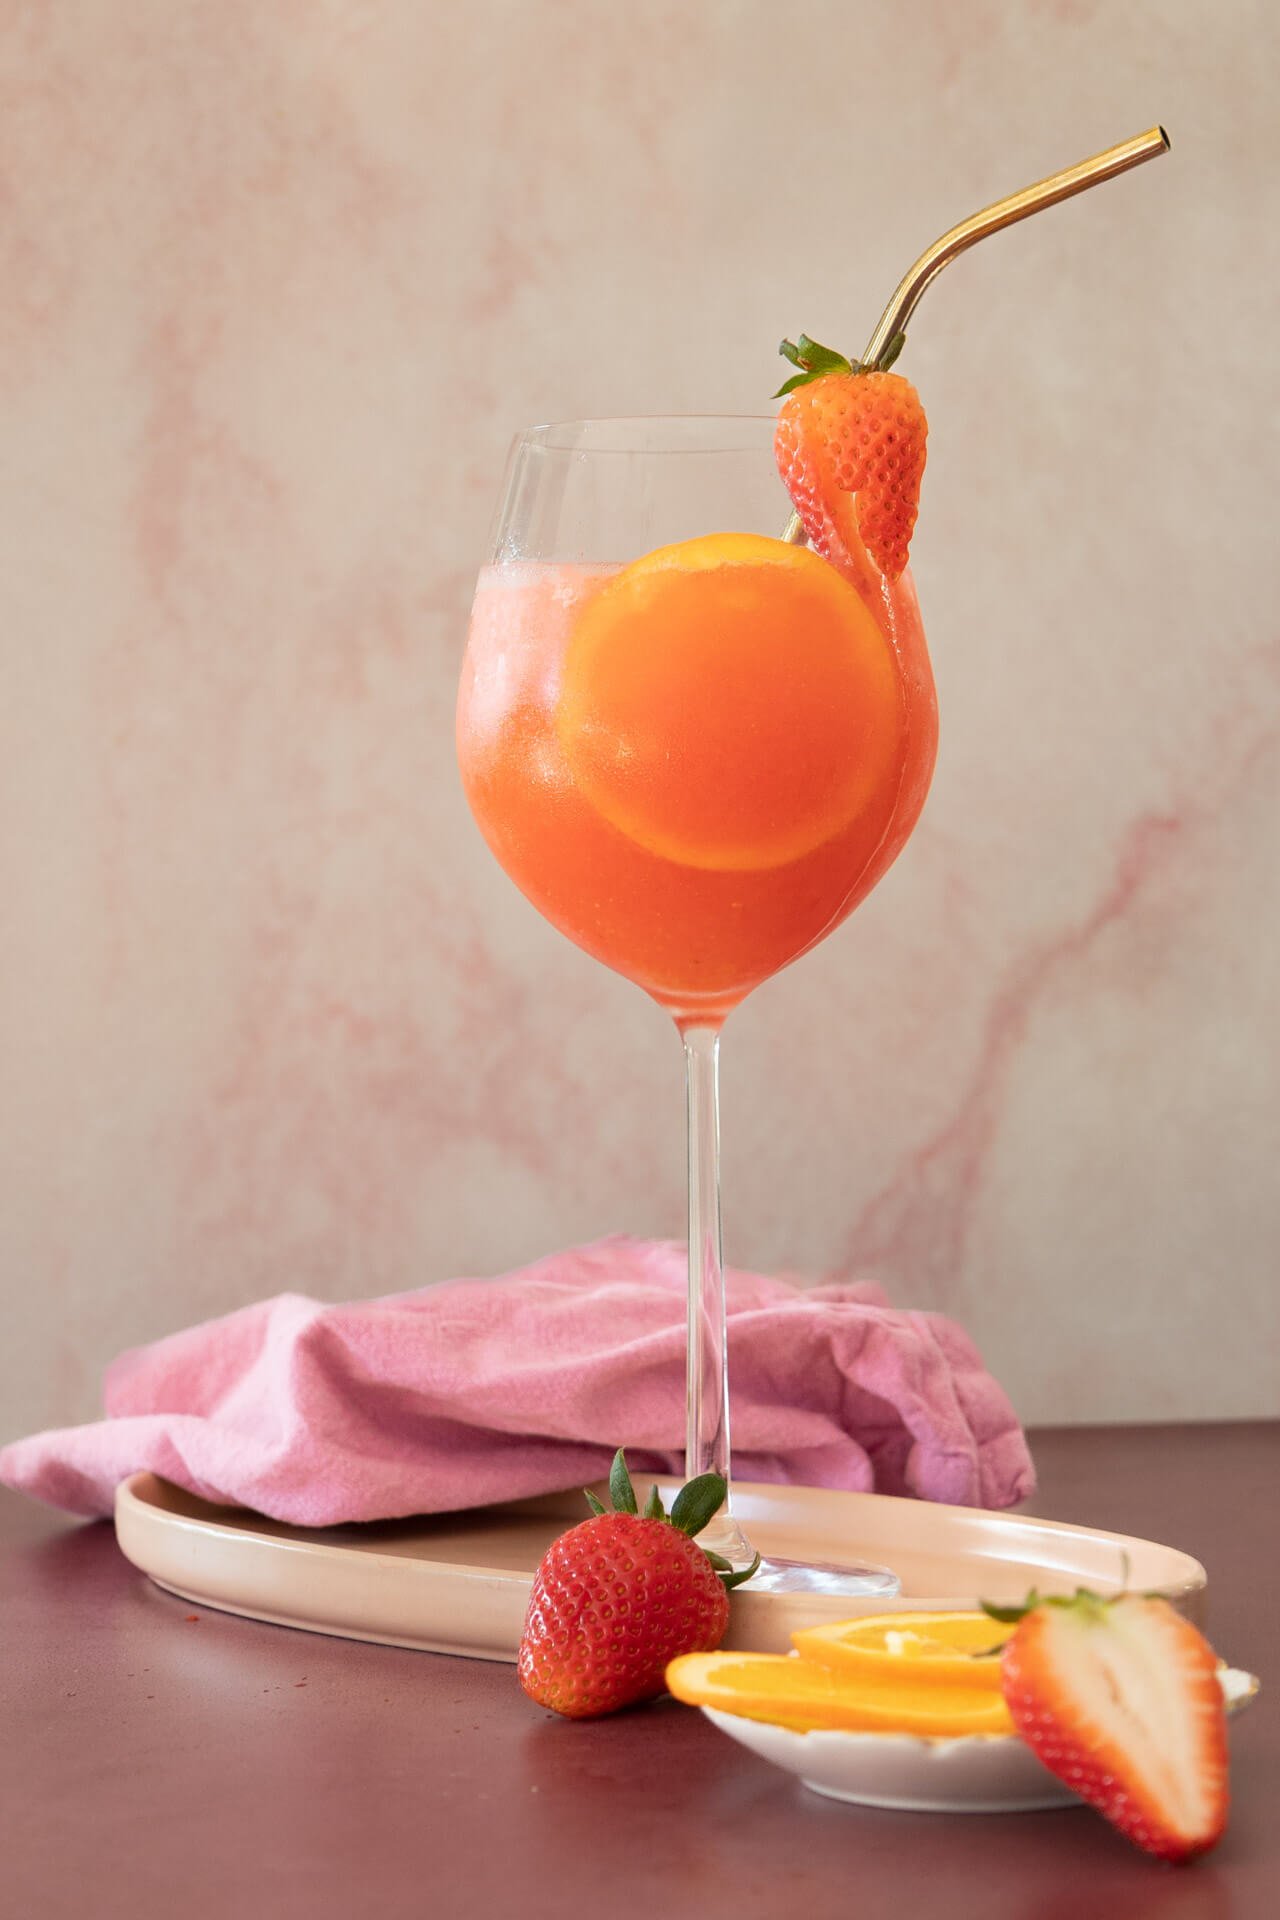 The 11 Best Aperol Cocktails